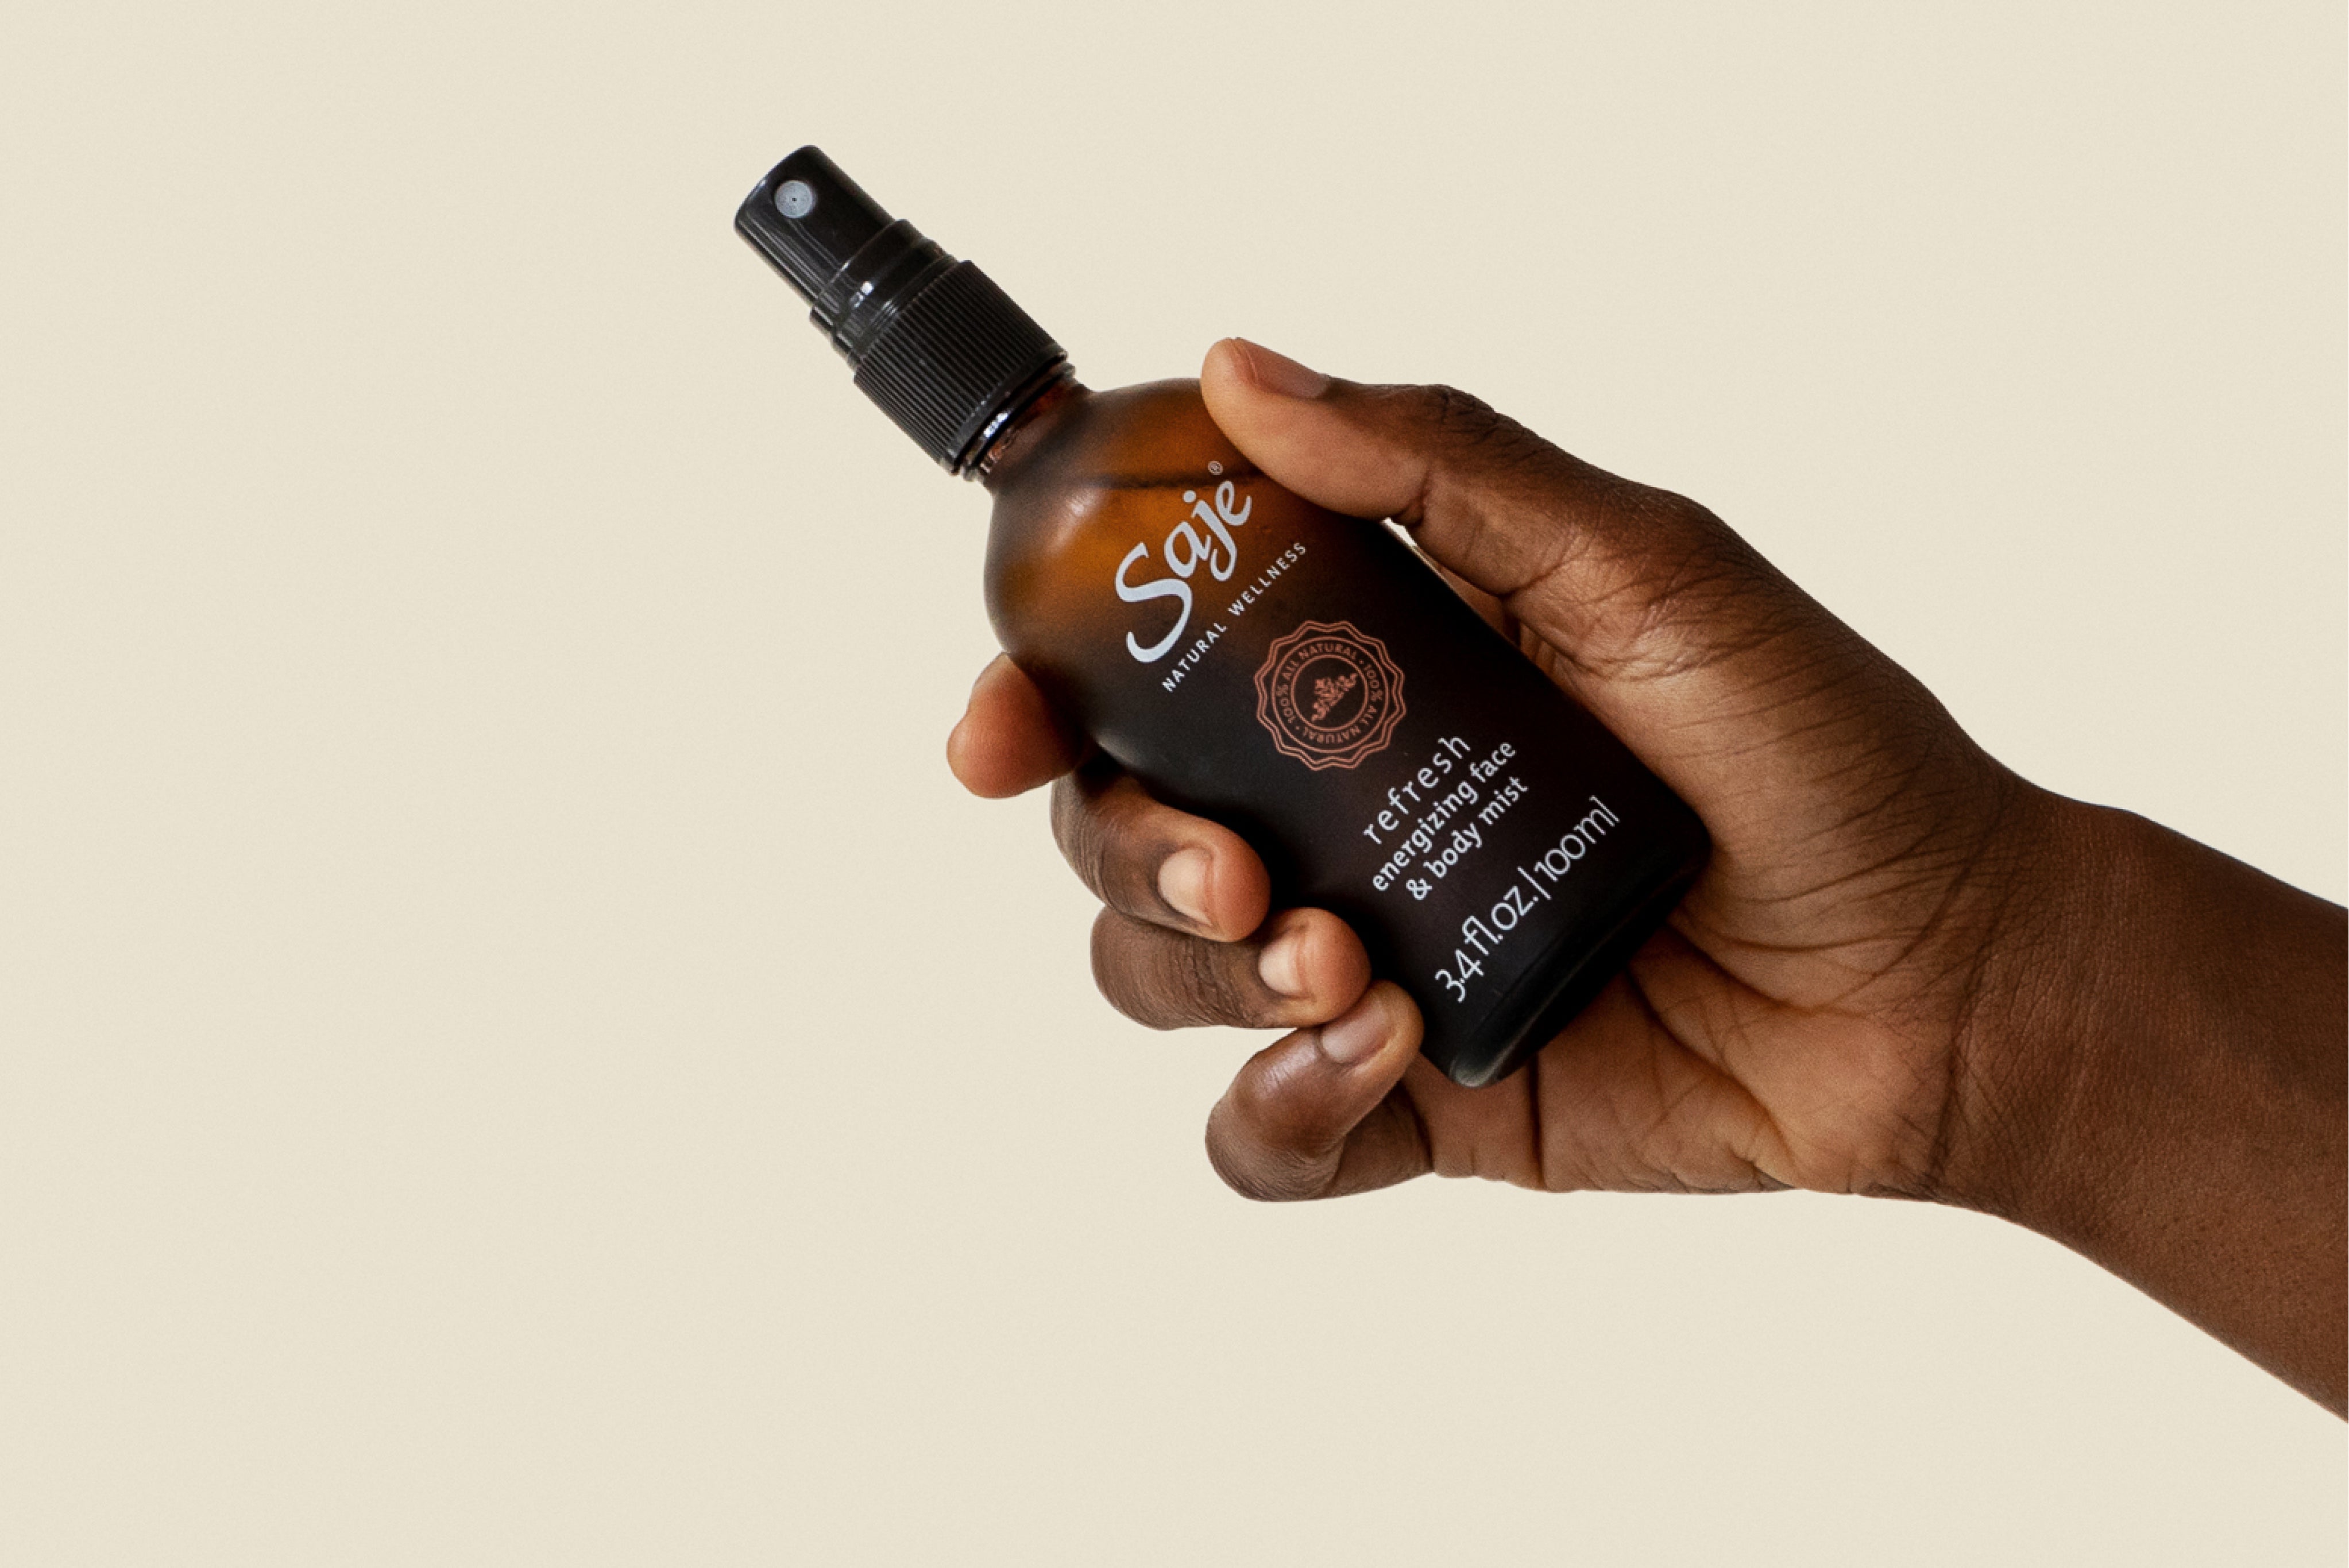 A hand holding refresh mist against a beige background